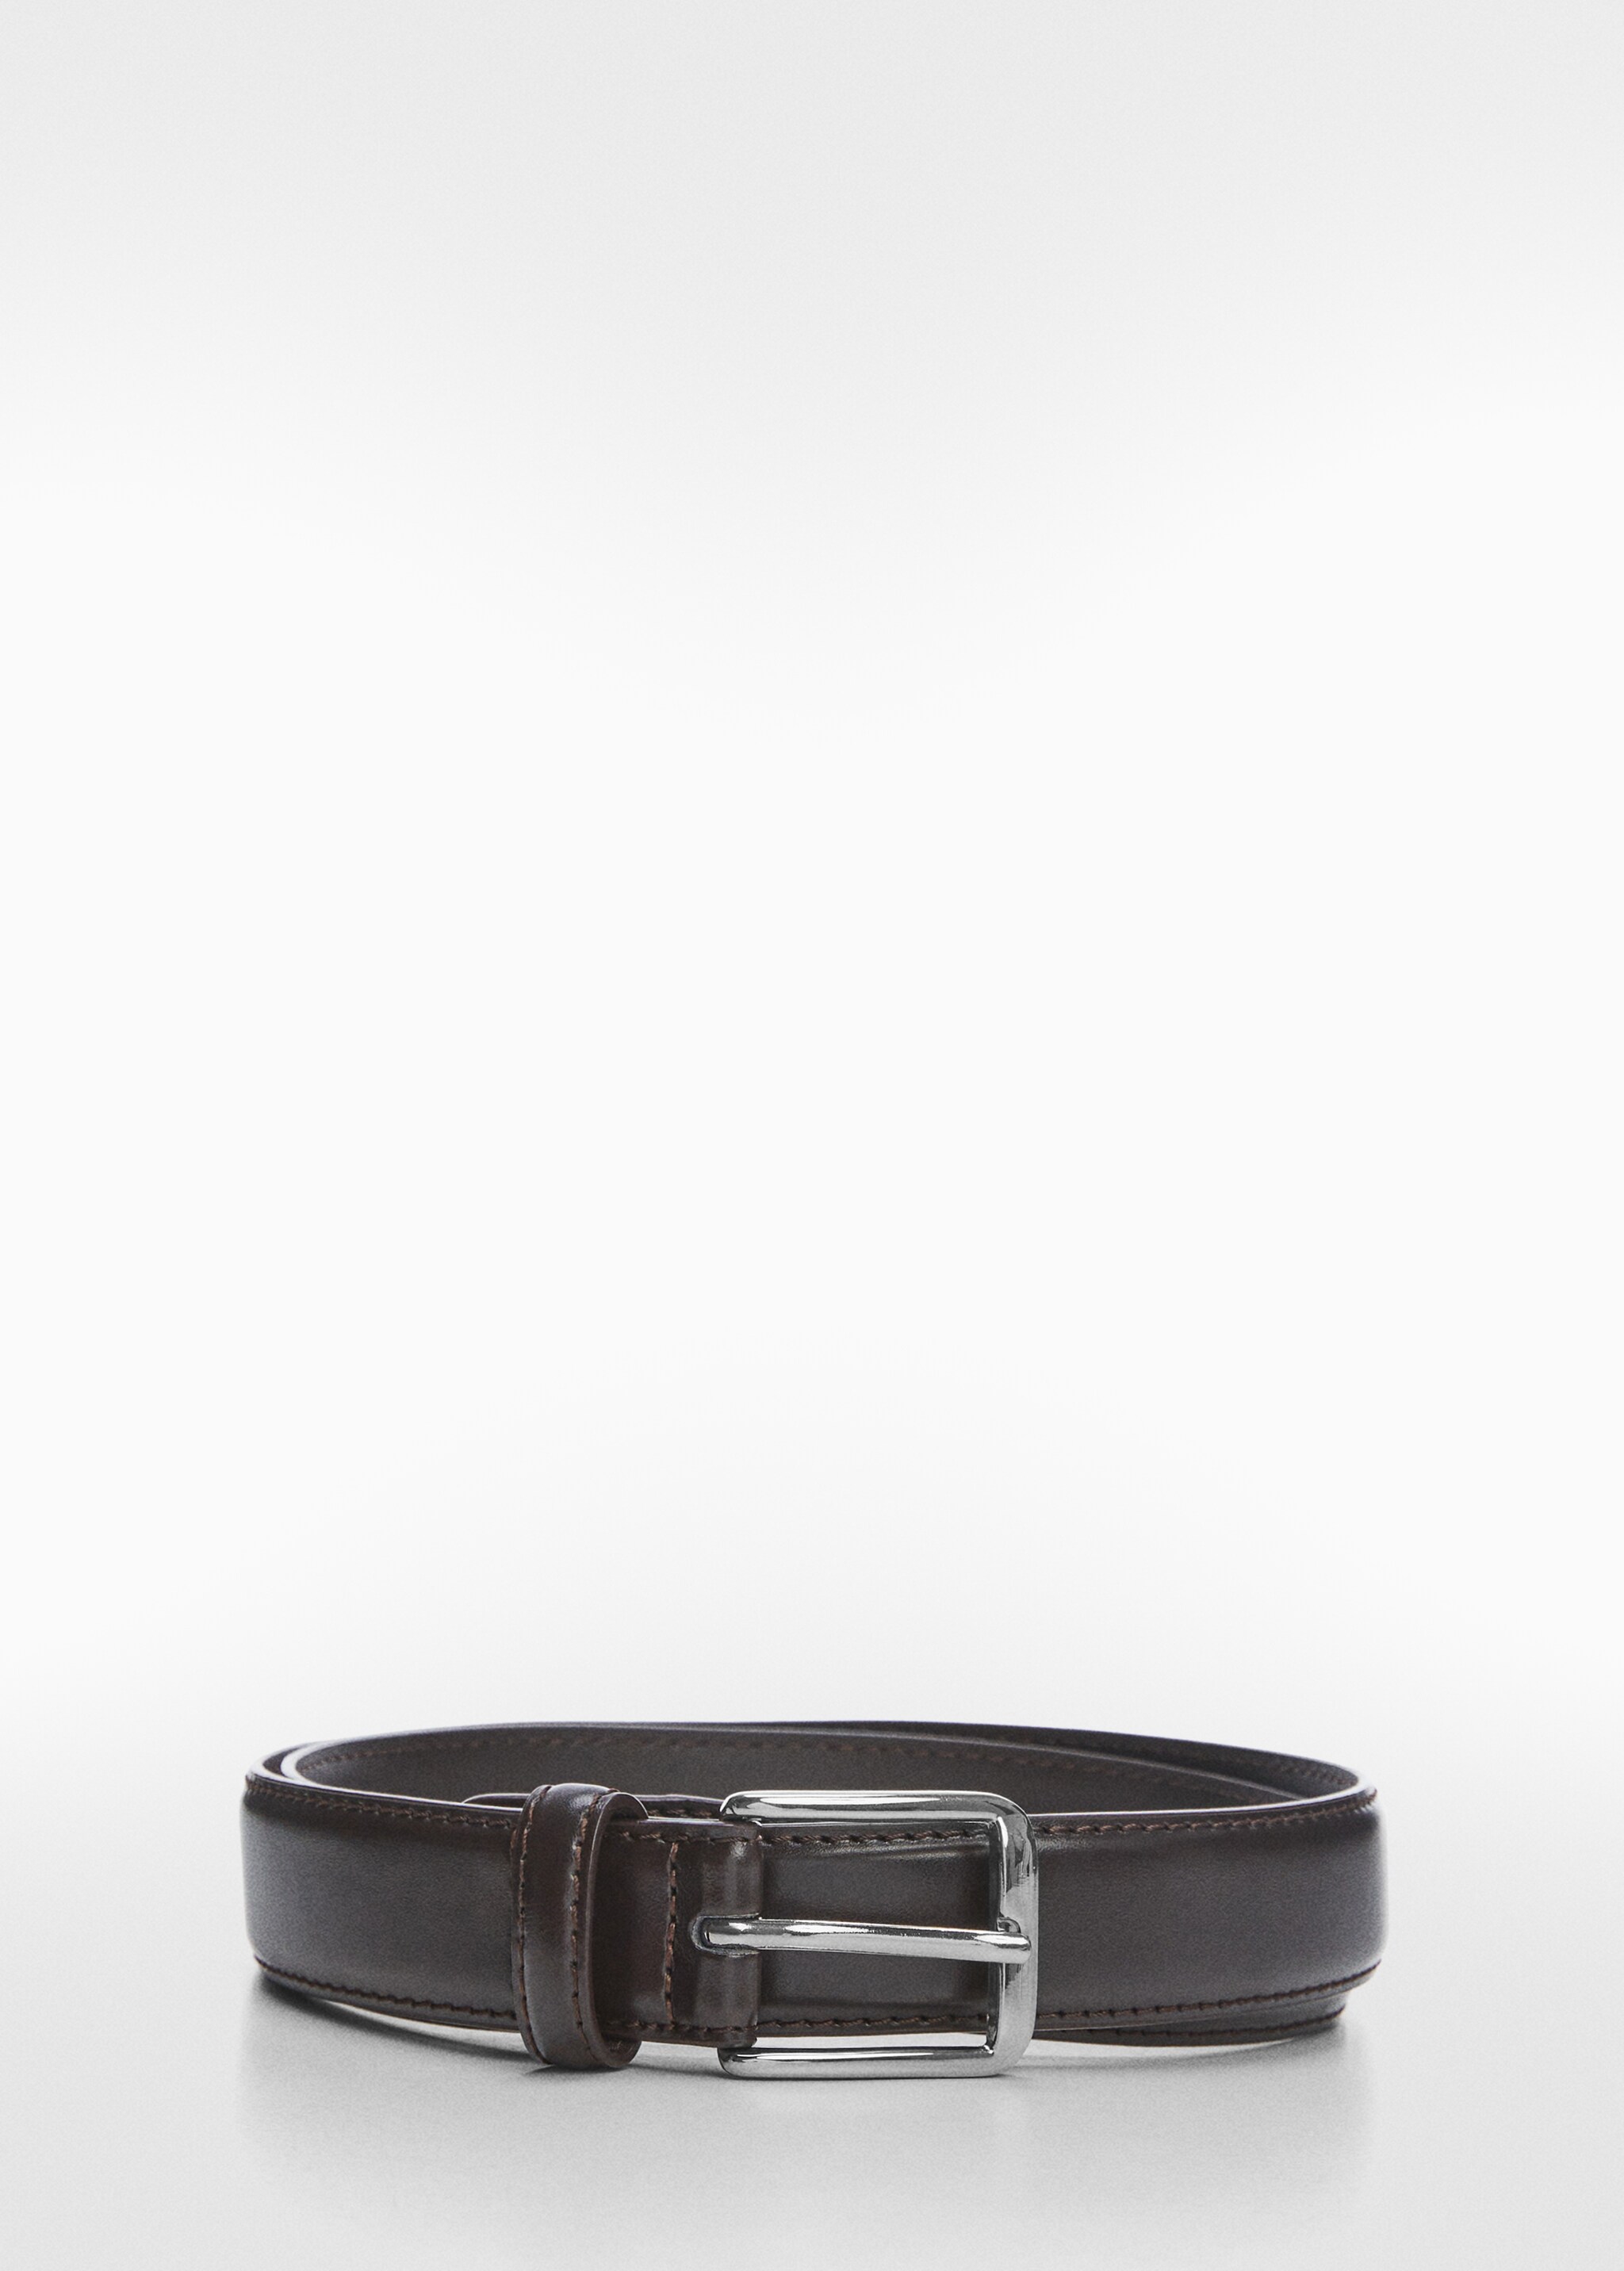 Leather belt - Article without model